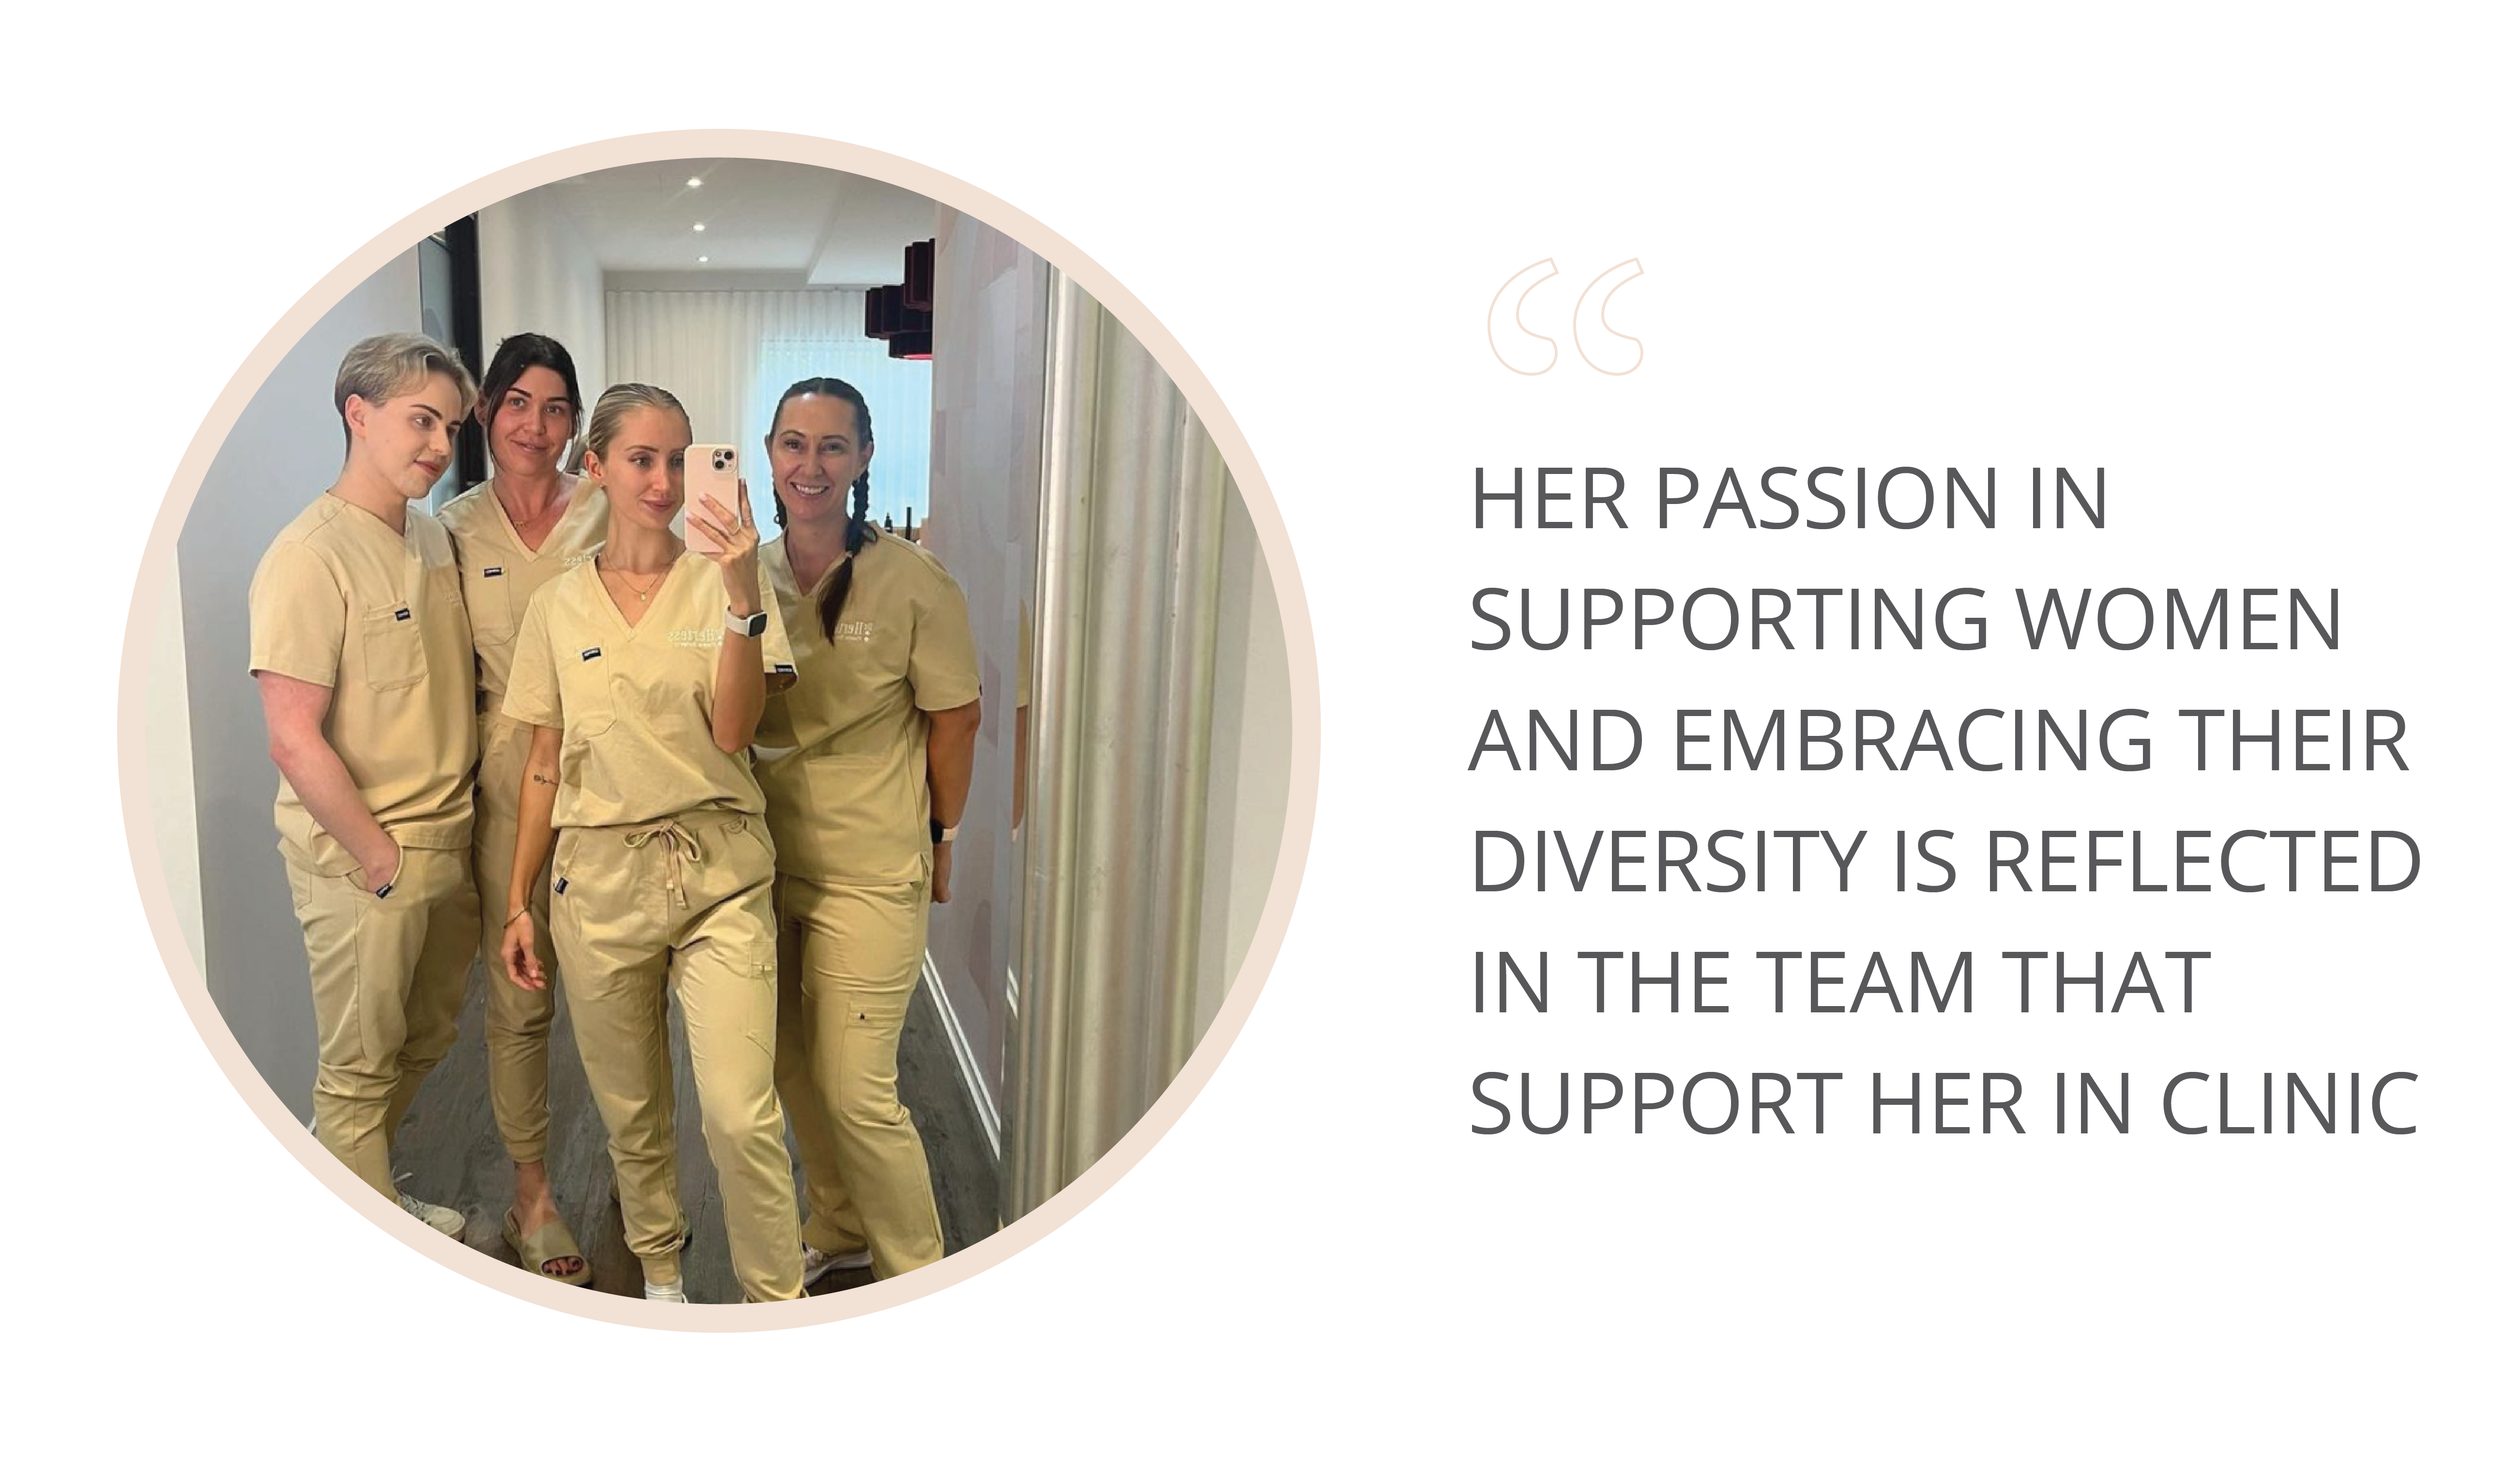 Dr Hertess Plastic Surgery kind and compassionate team